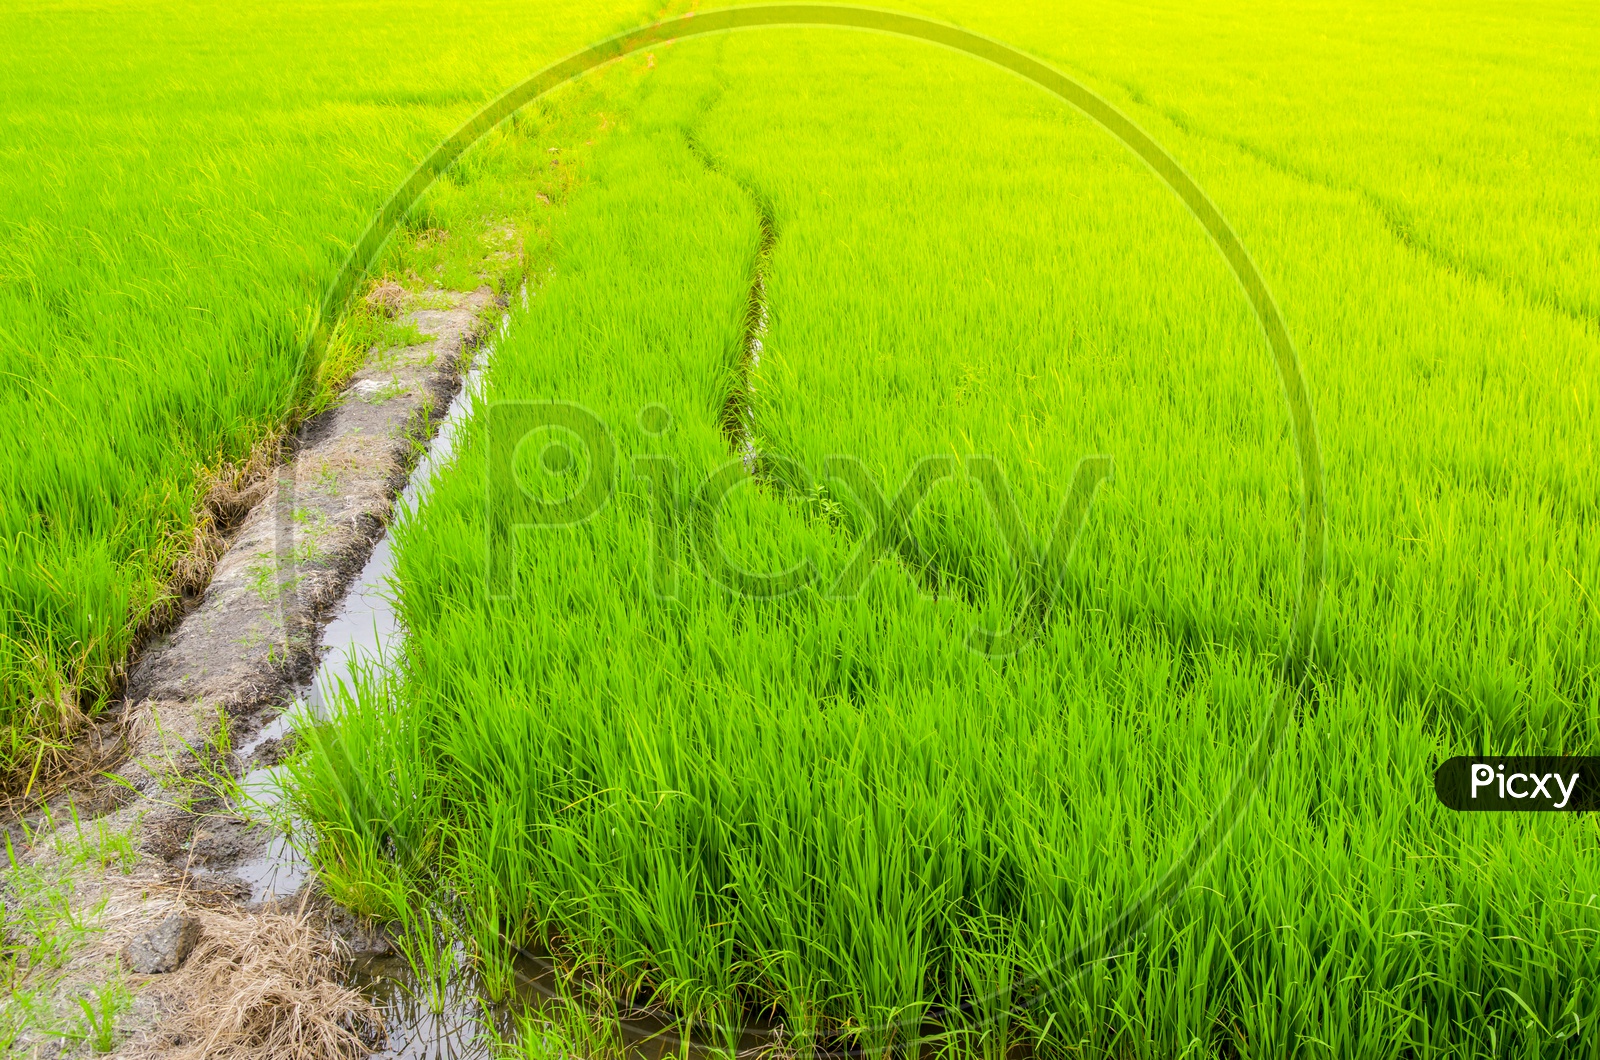 A Green Paddy Field in Thailand